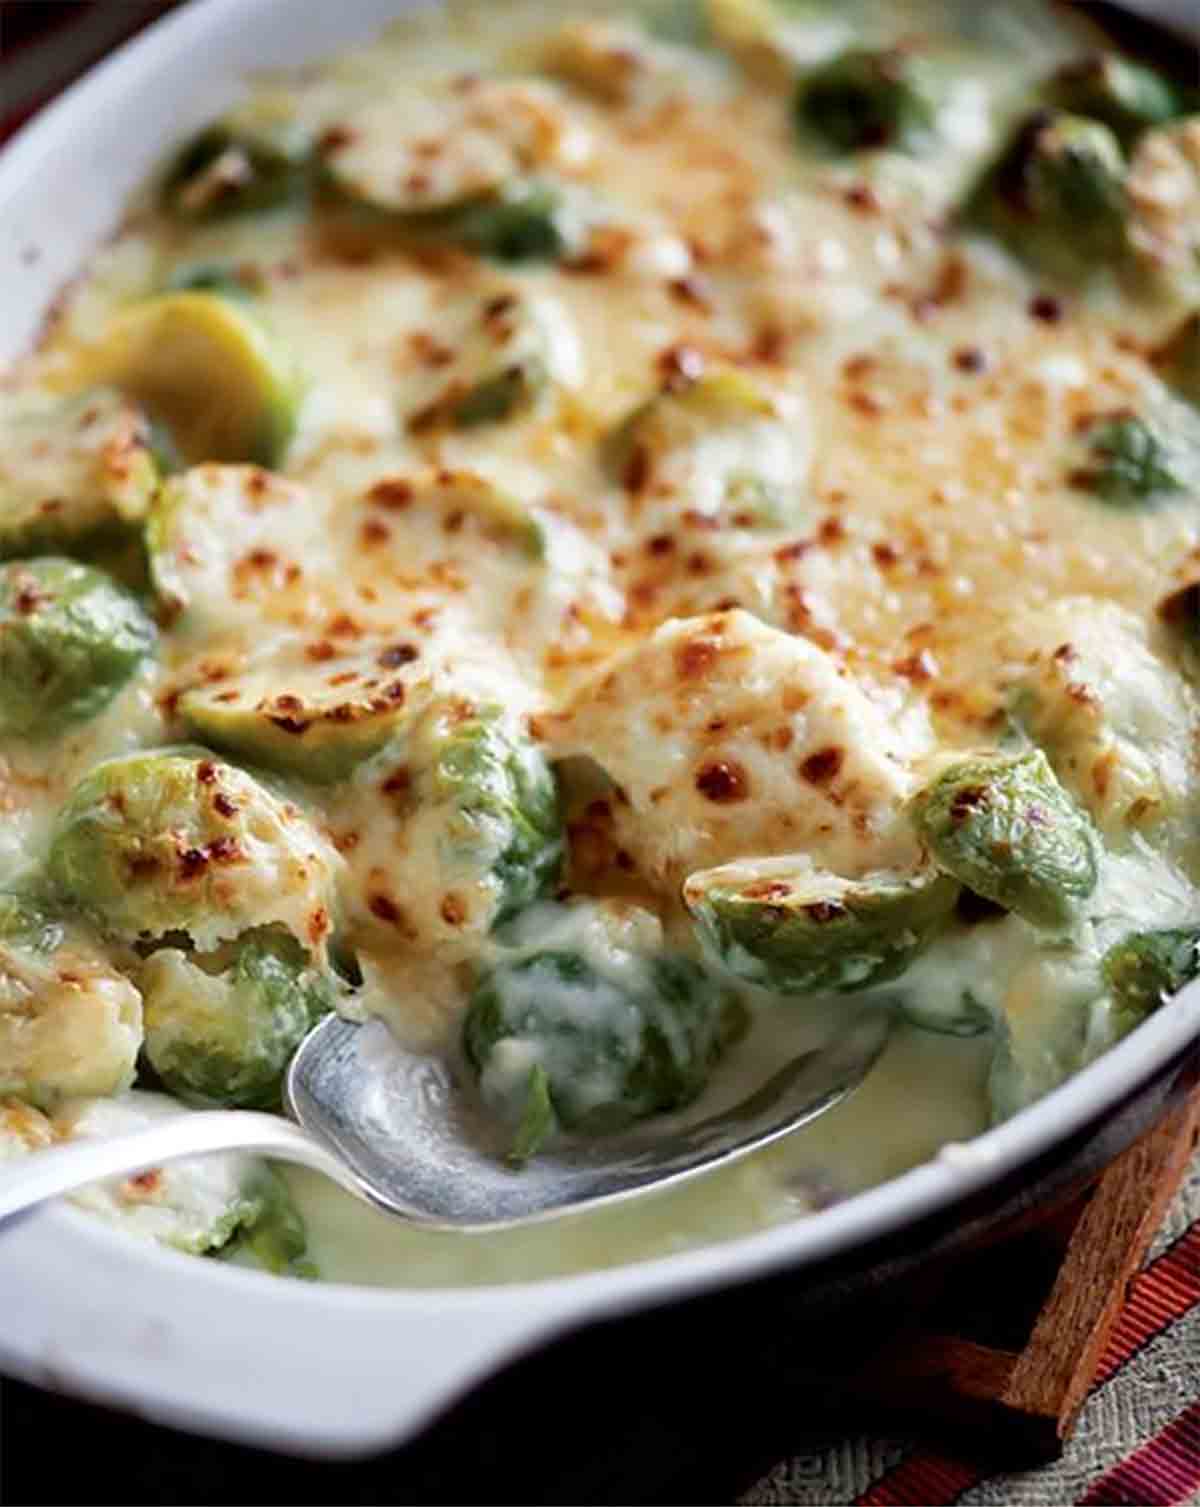 A white gratin dish filled with creamy Brussels sprouts and covered in cheese.